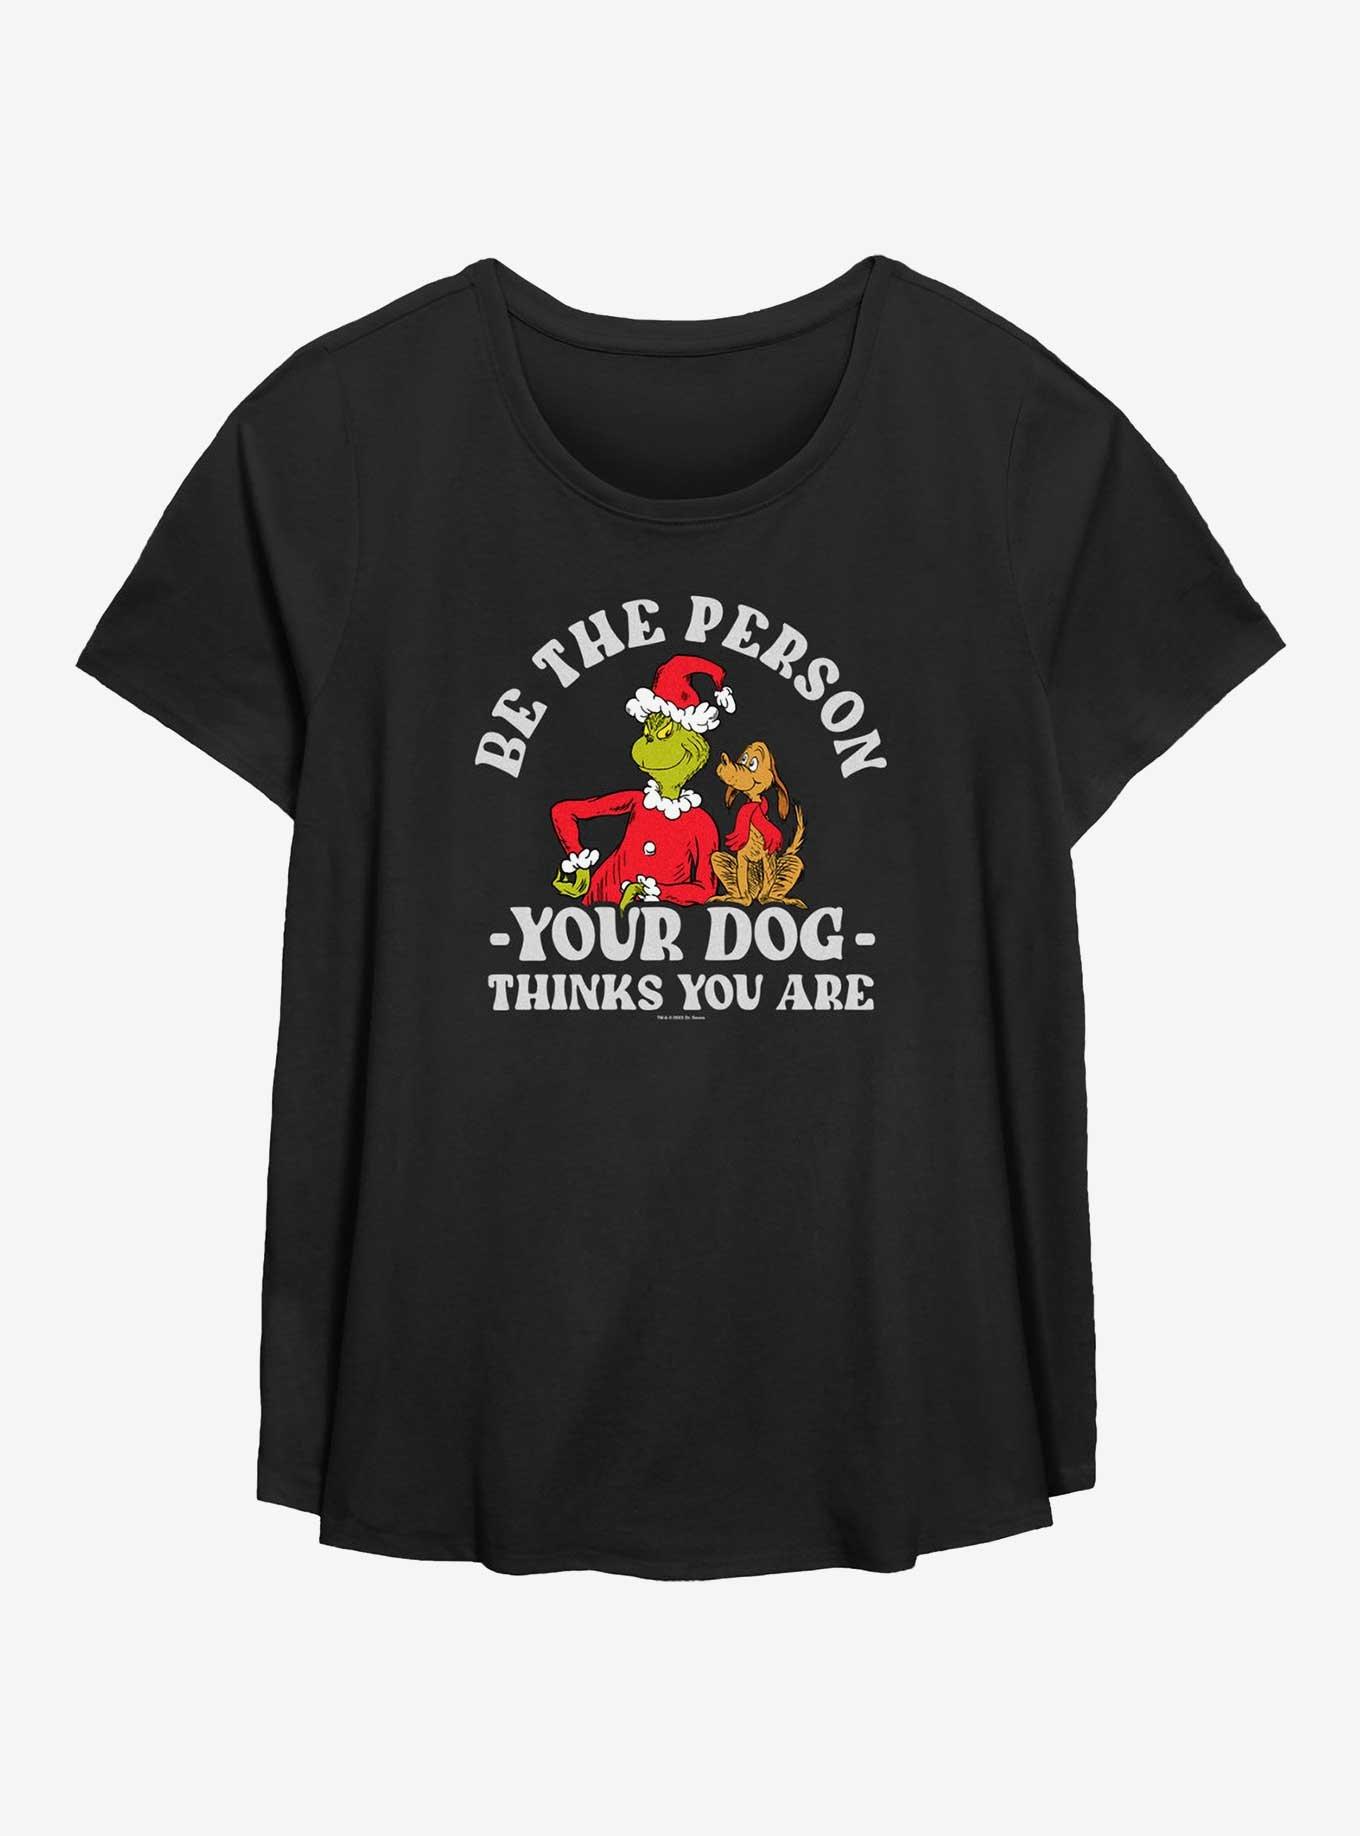 Dr. Seuss How The Grinch Stole Christmas Your Dog Thinks You Are Girls T-Shirt Plus Size, BLACK, hi-res